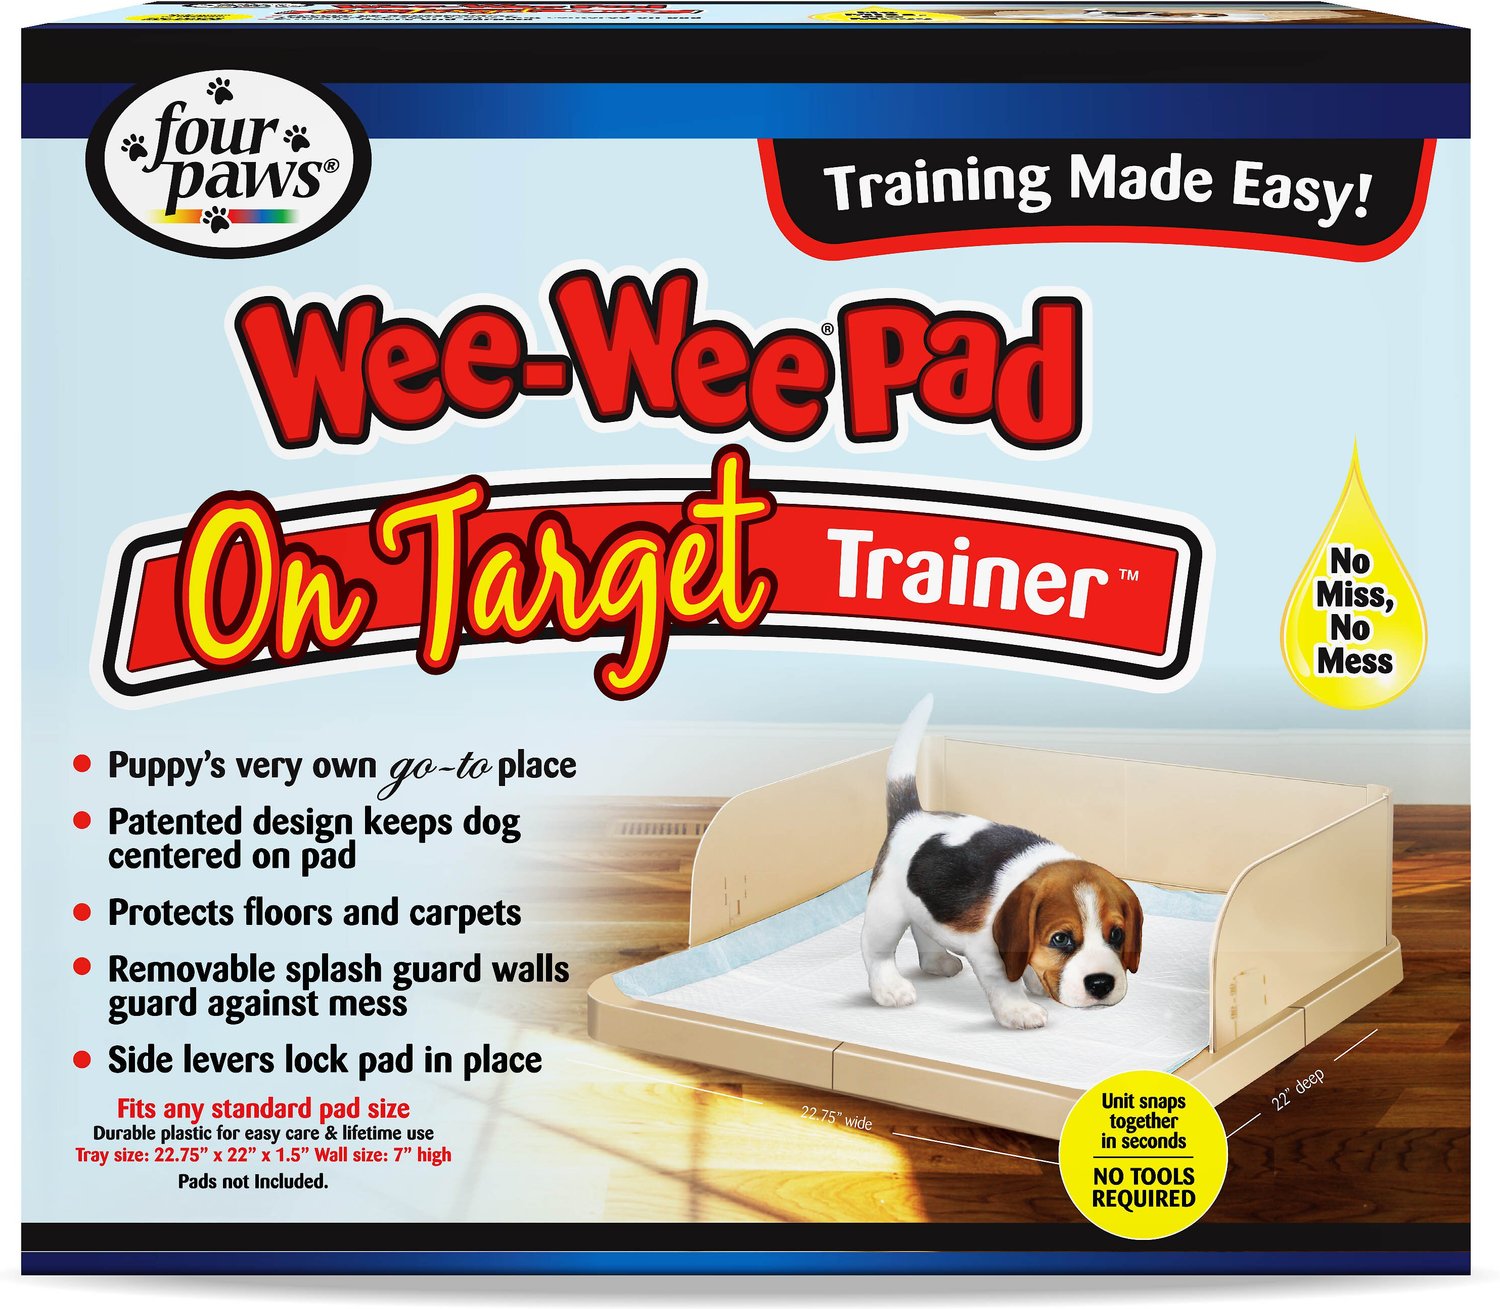 WEE-WEE Pad On Target Trainer - Chewy.com